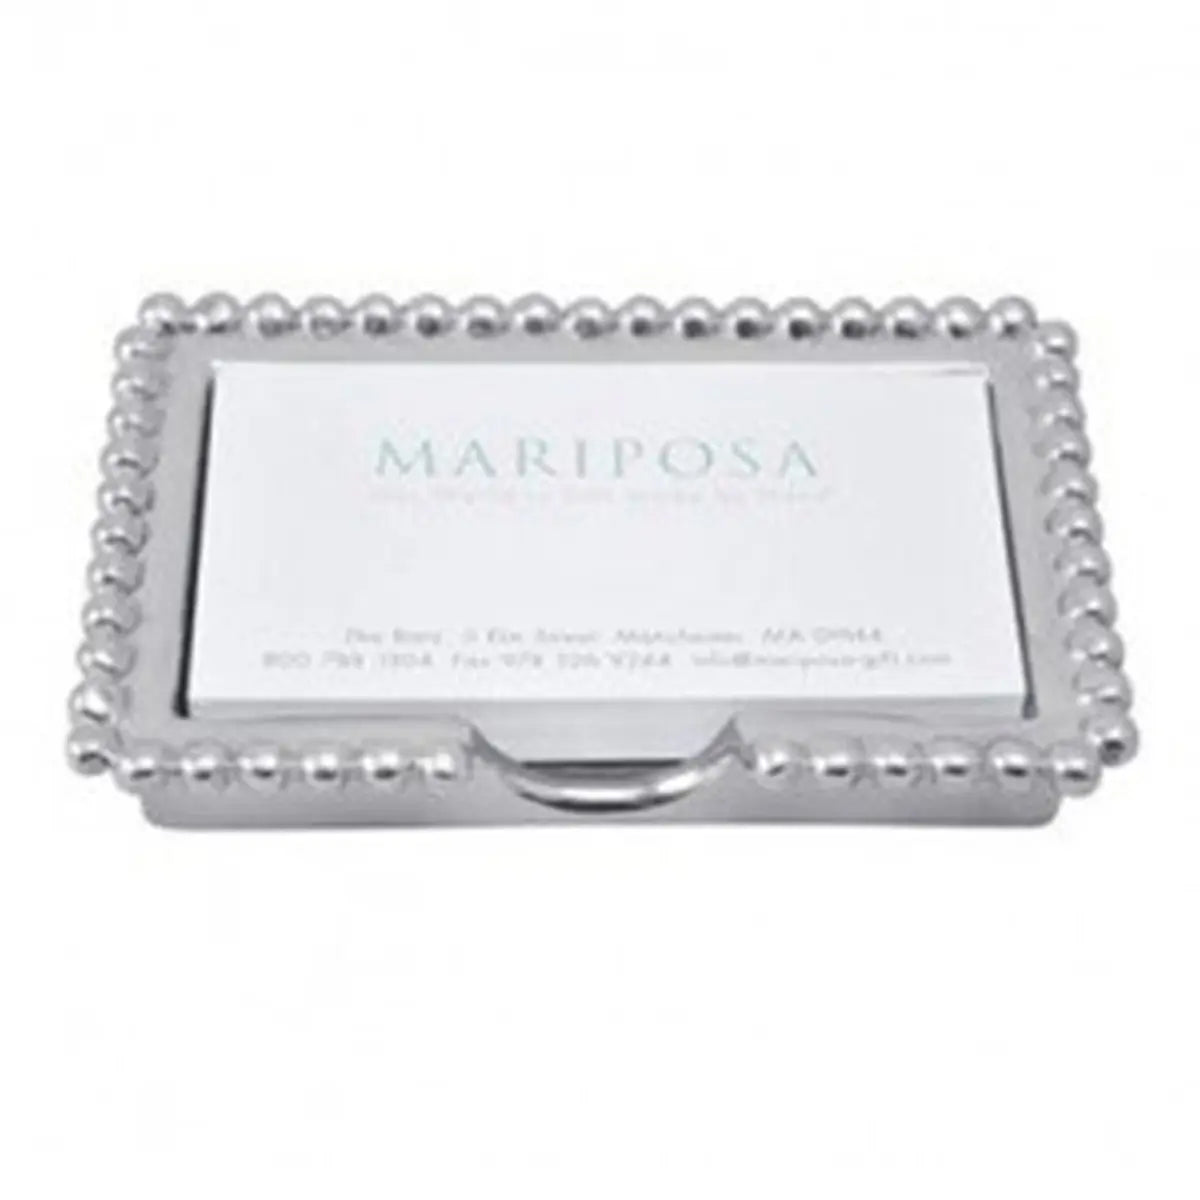 Mariposa Beaded Business Card Holder with cards inside